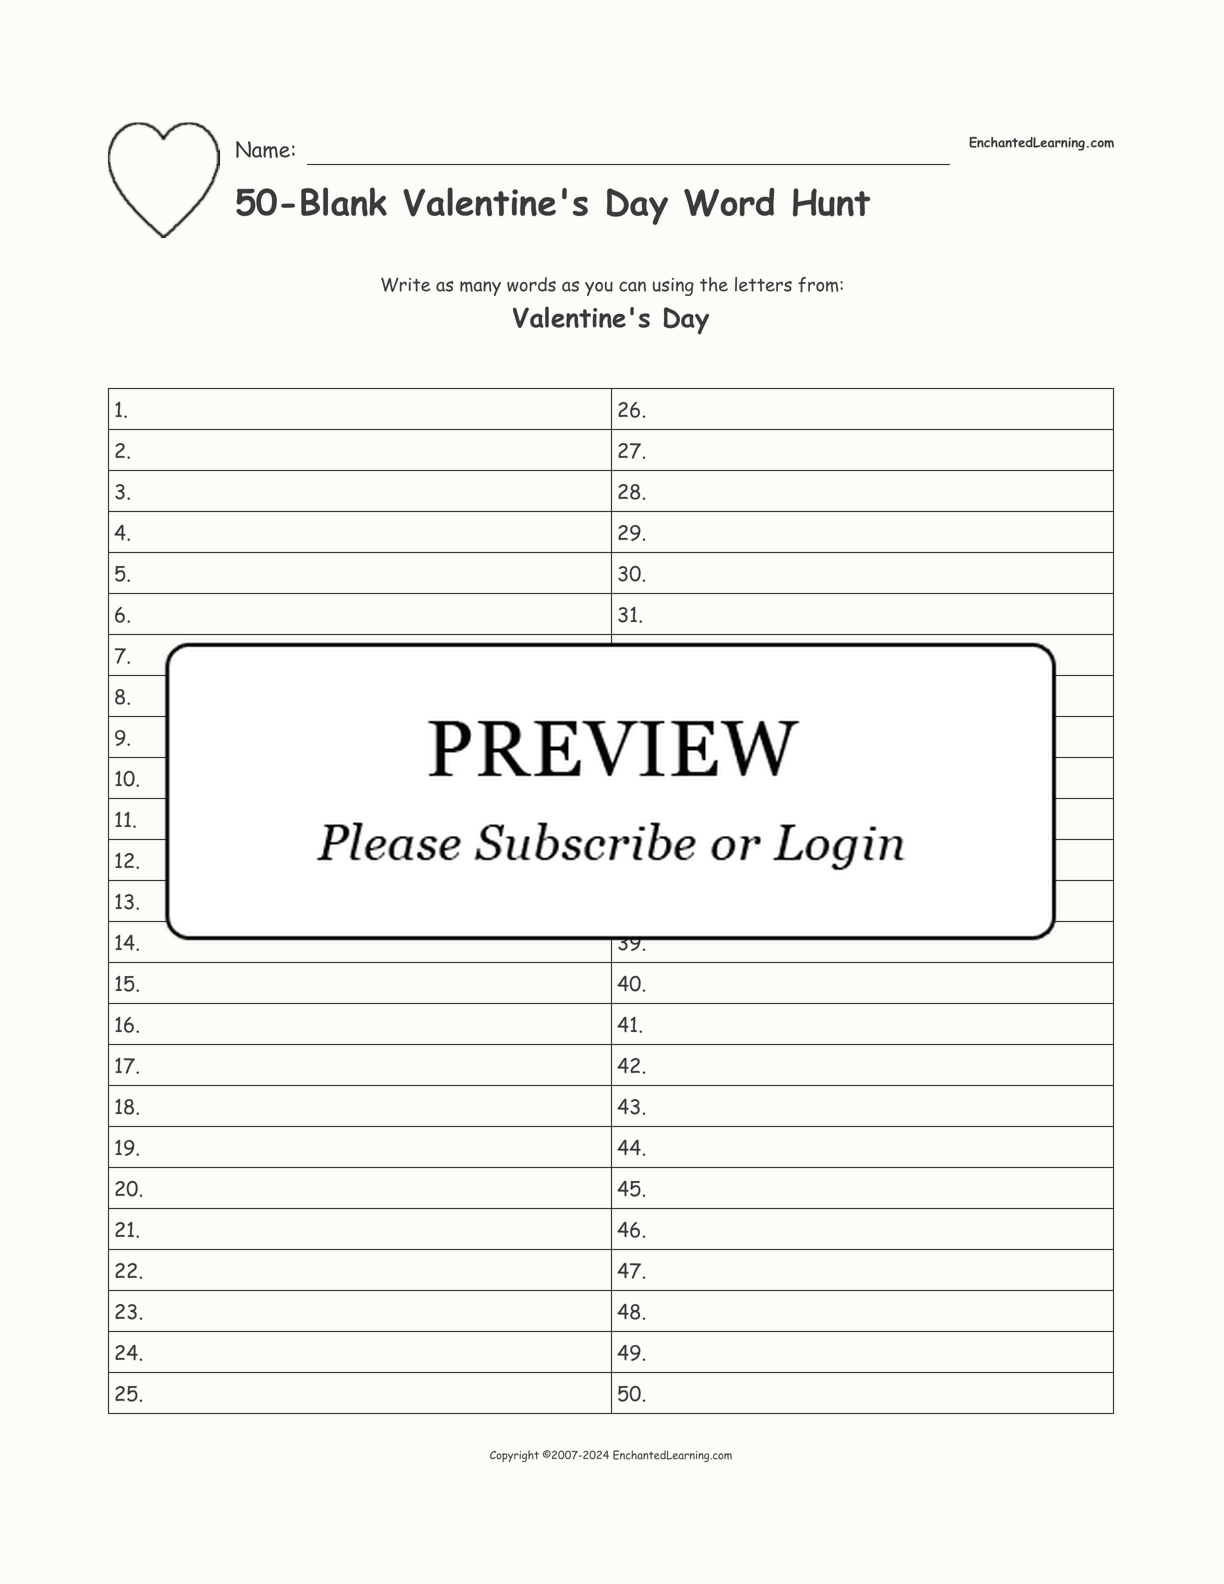 50-Blank Valentine's Day Word Hunt interactive worksheet page 1